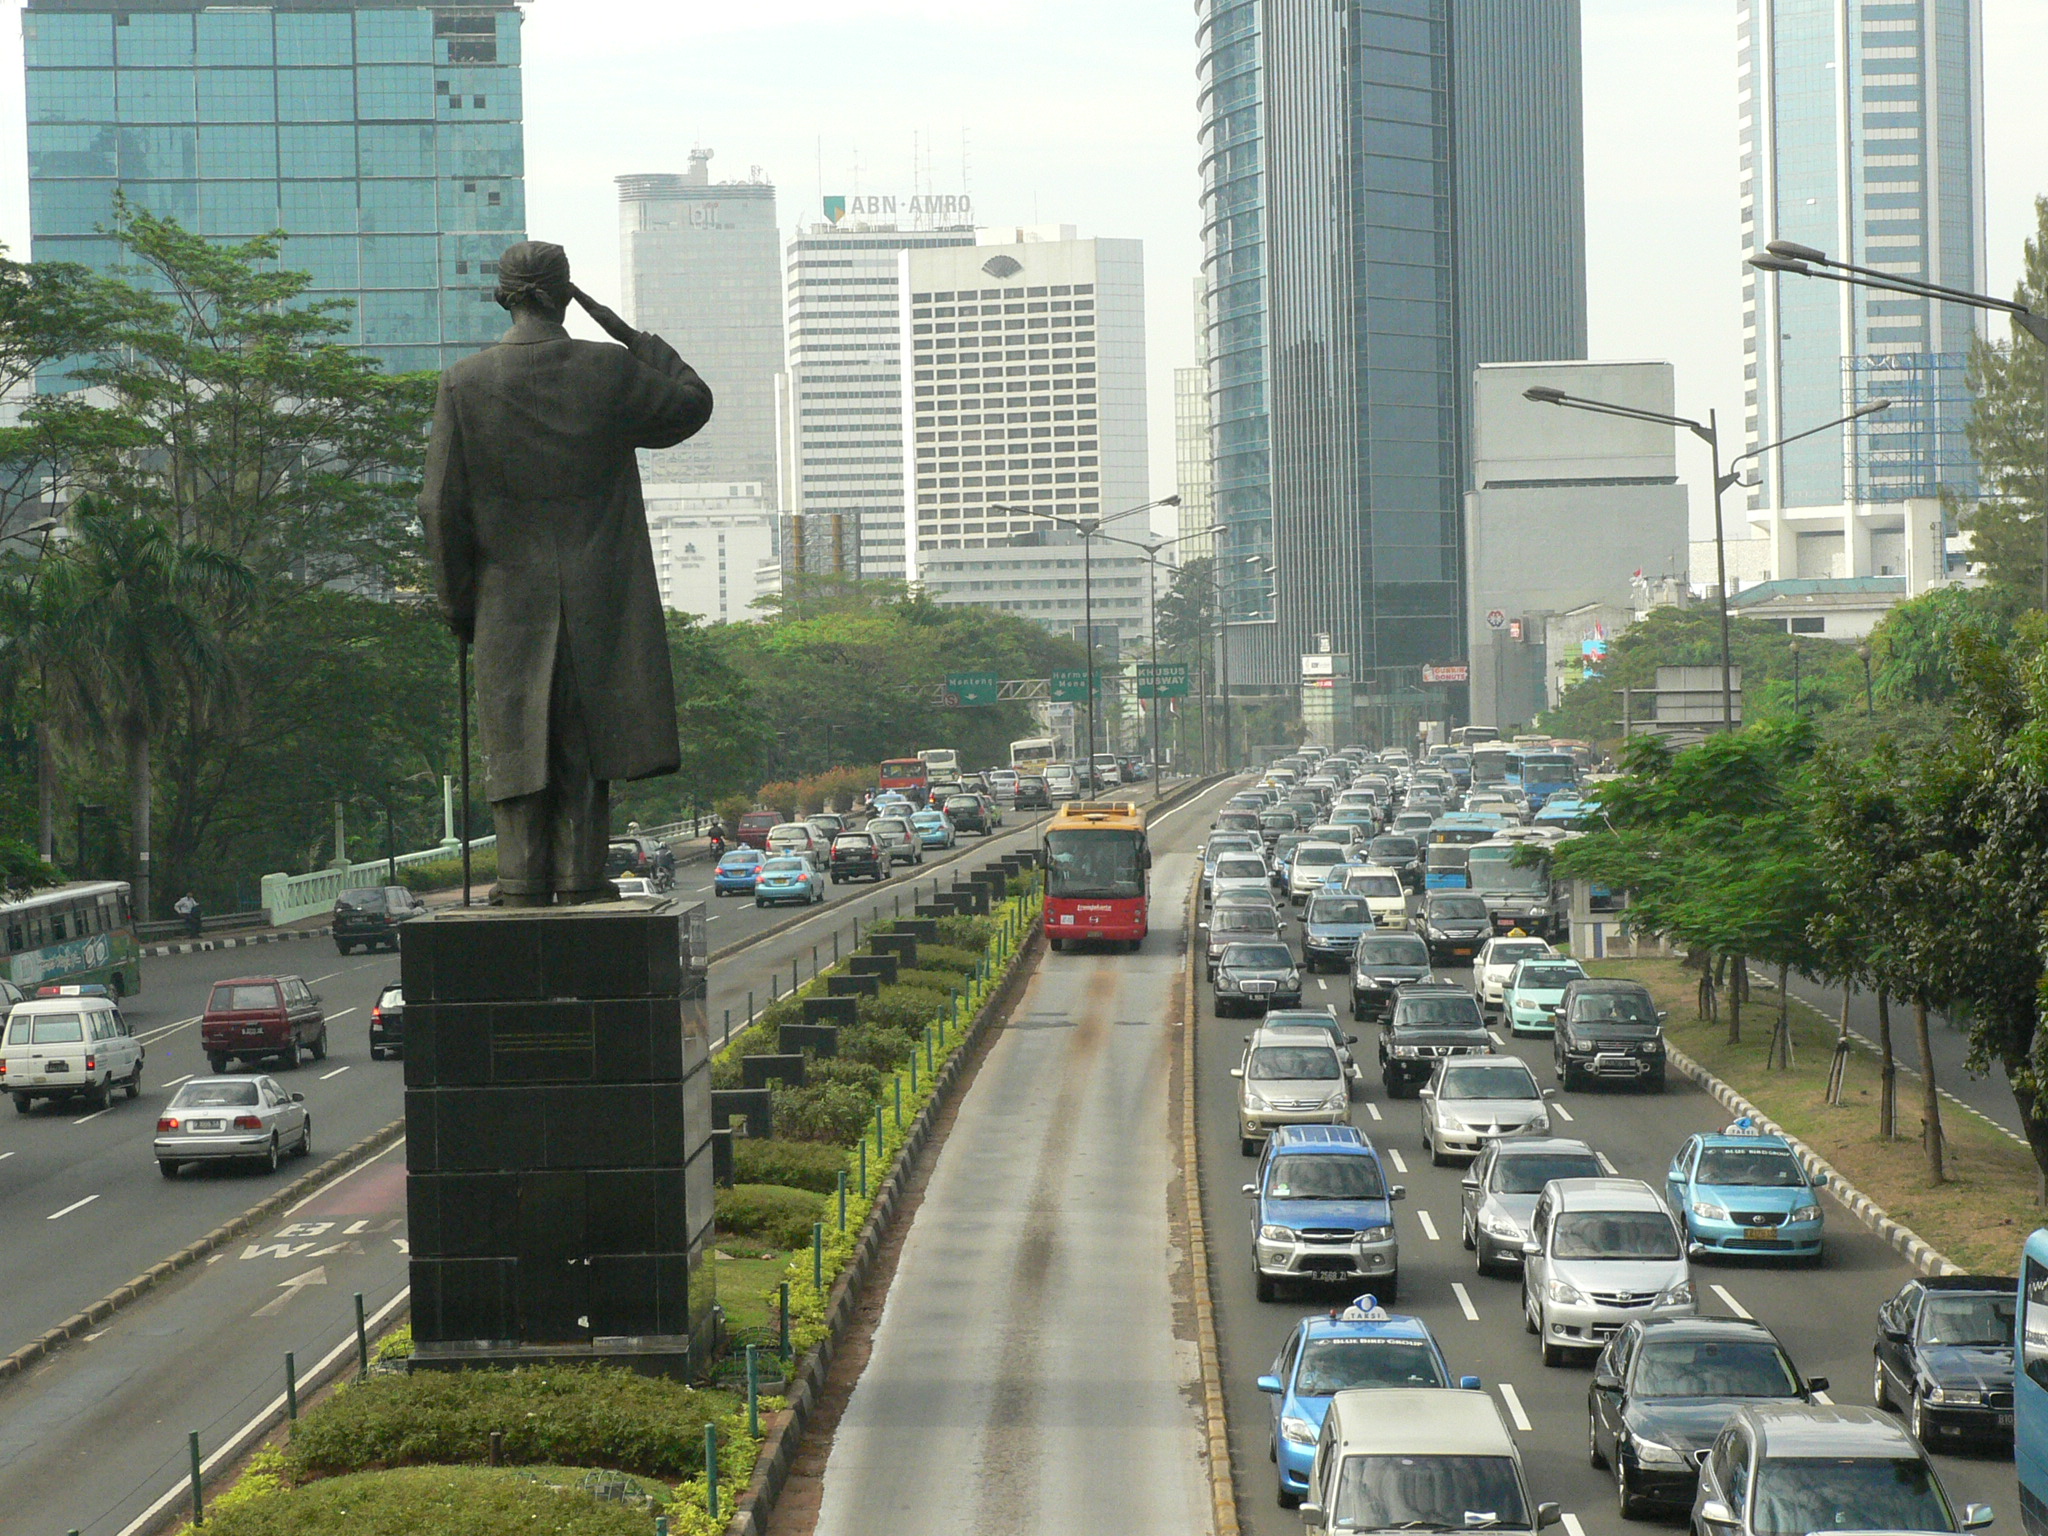 Download this Sudirman Statue Jakarta Indonesia picture